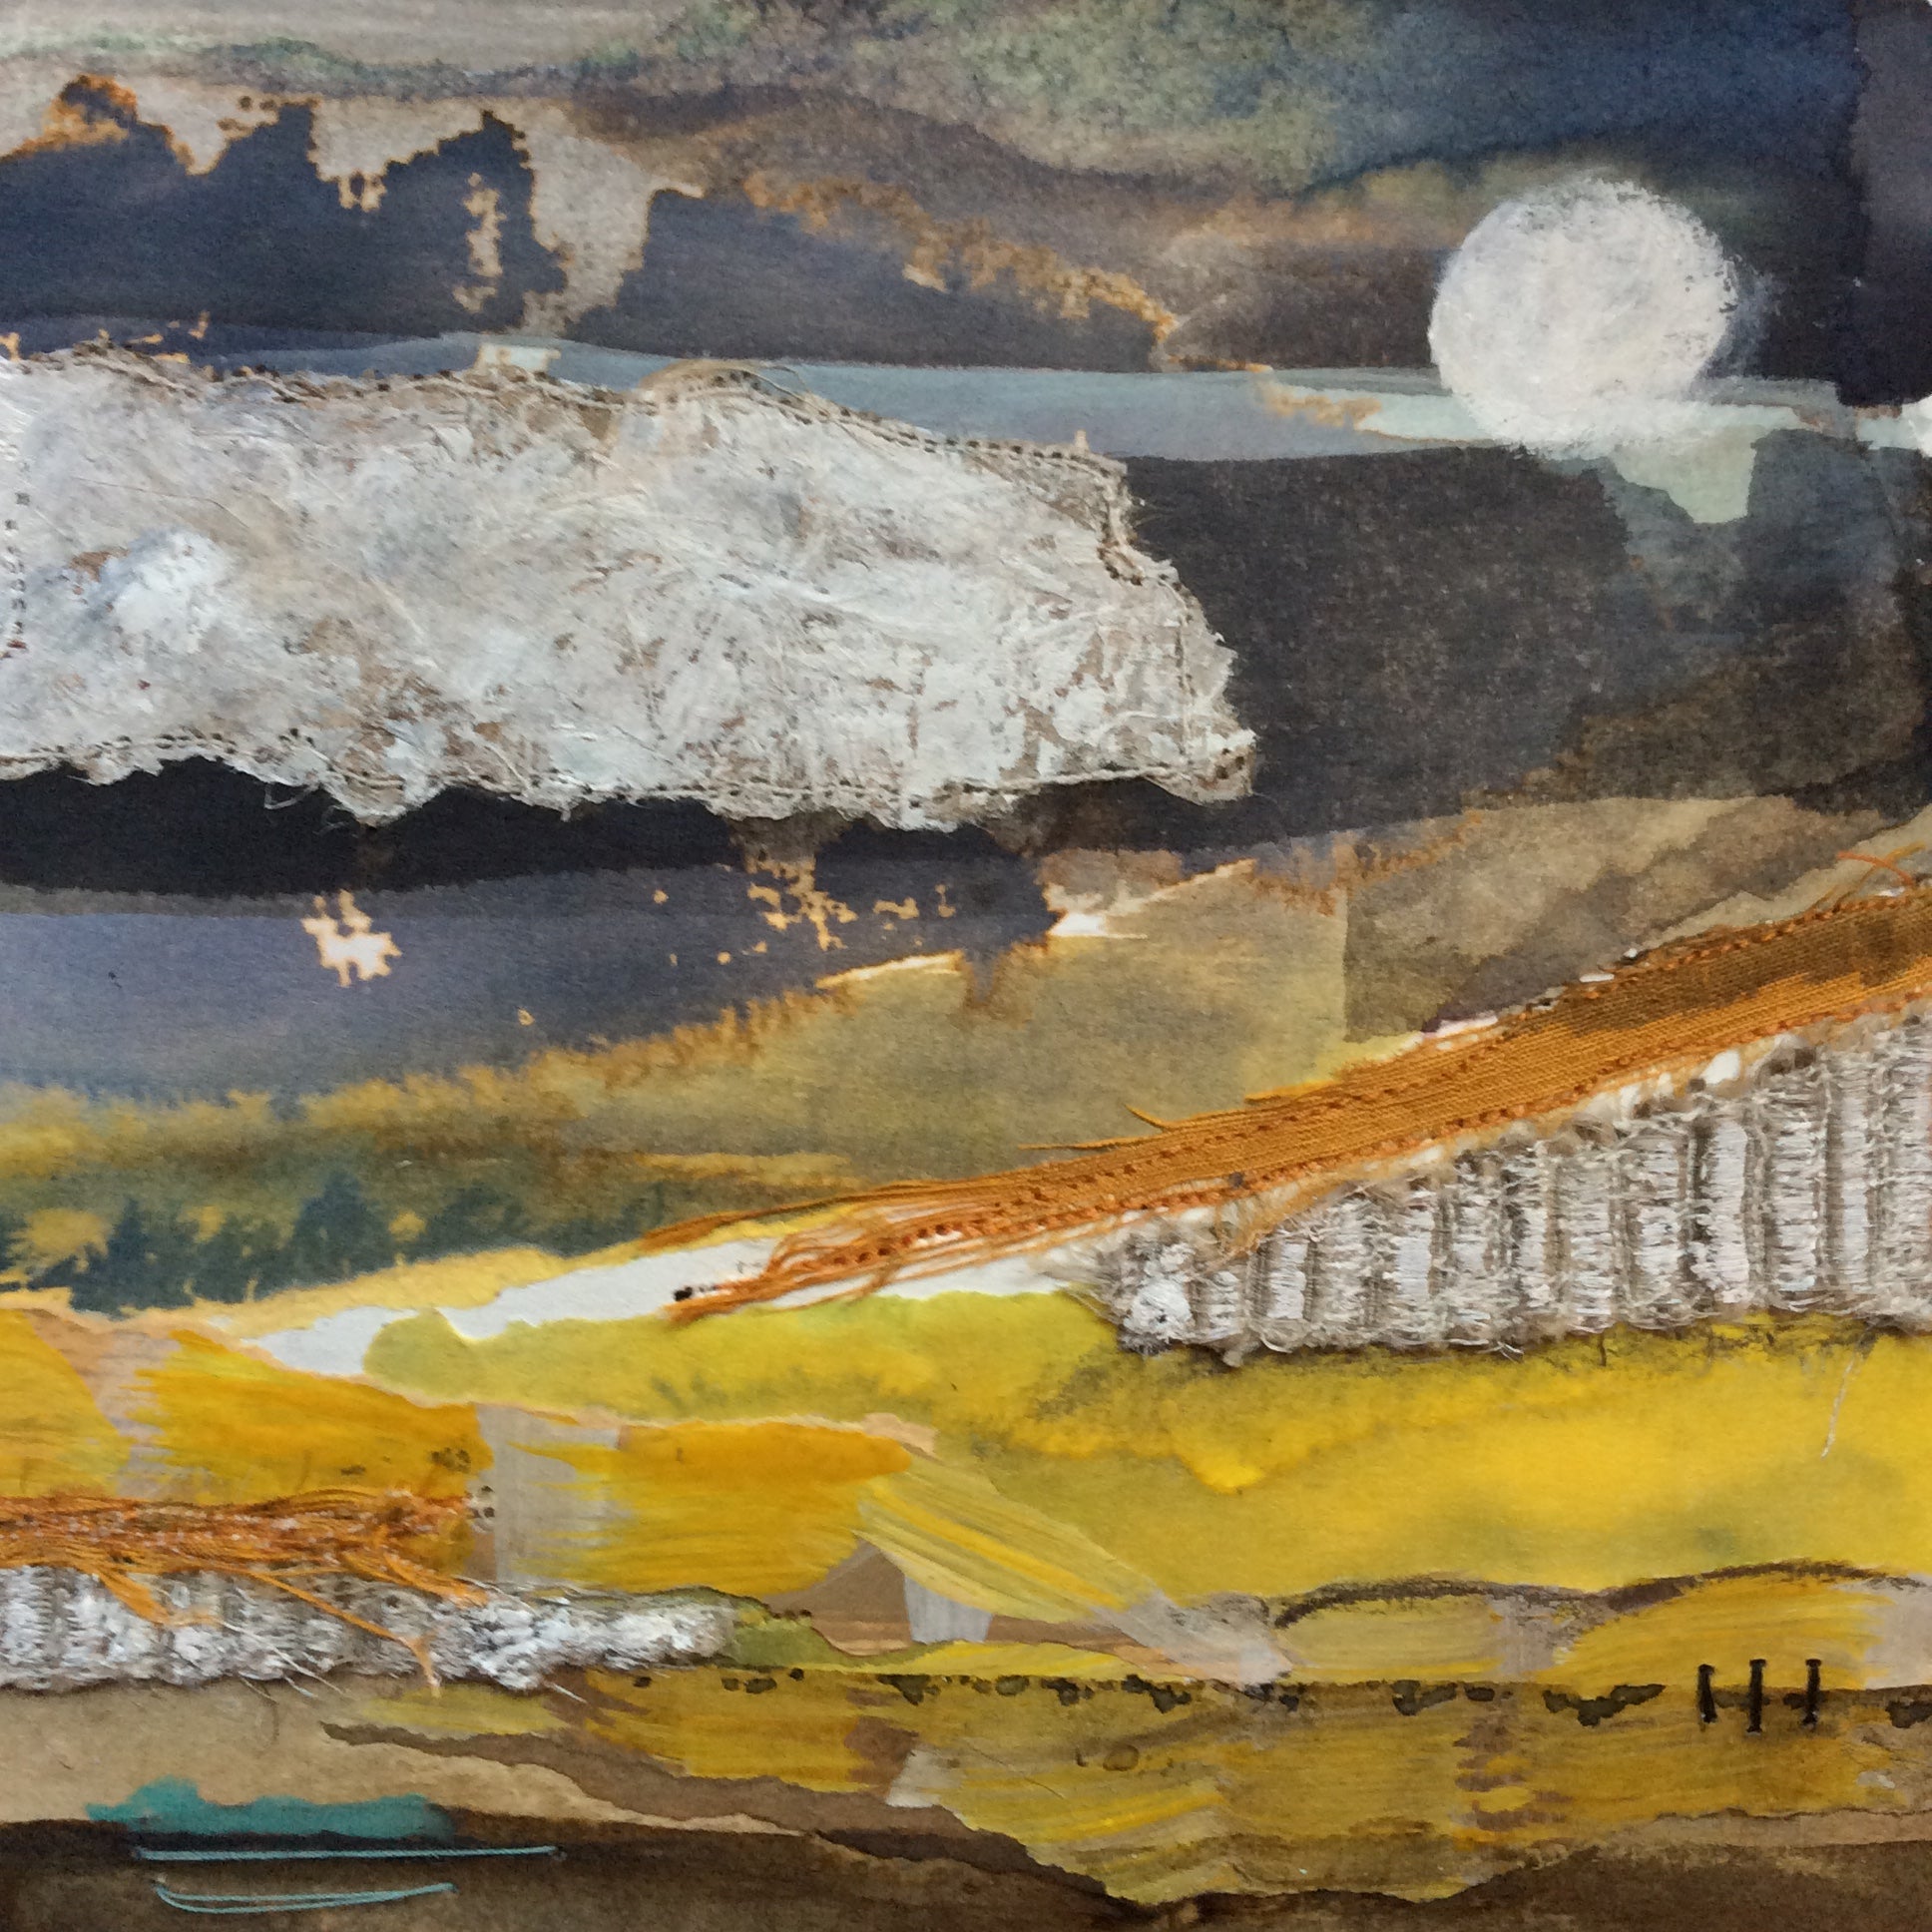 Mixed Media Art By Louise O'Hara - "The calm landscape"